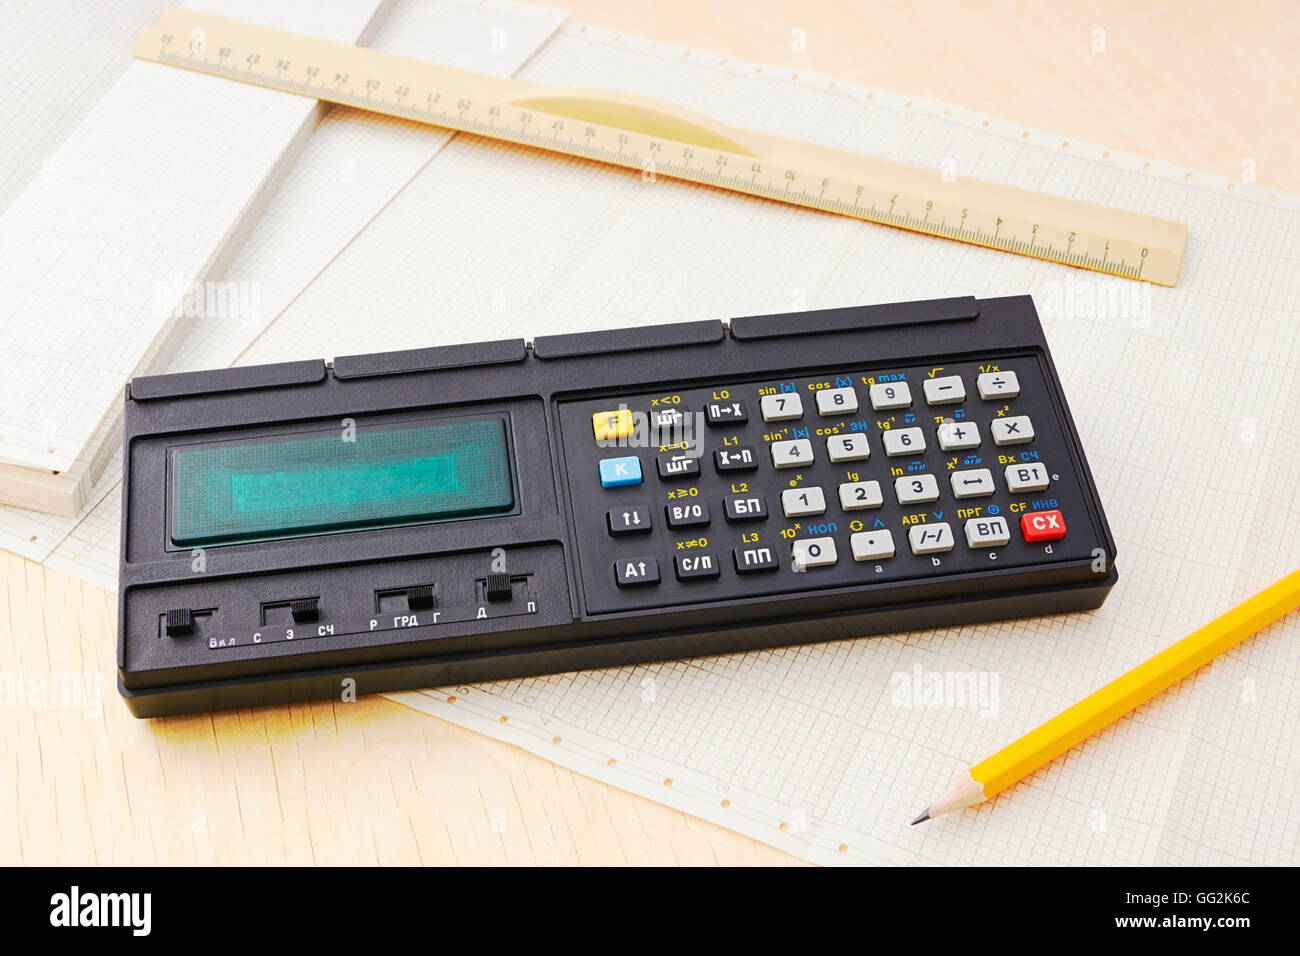 Vintage electronic calculator on diagram paper Stock Photo